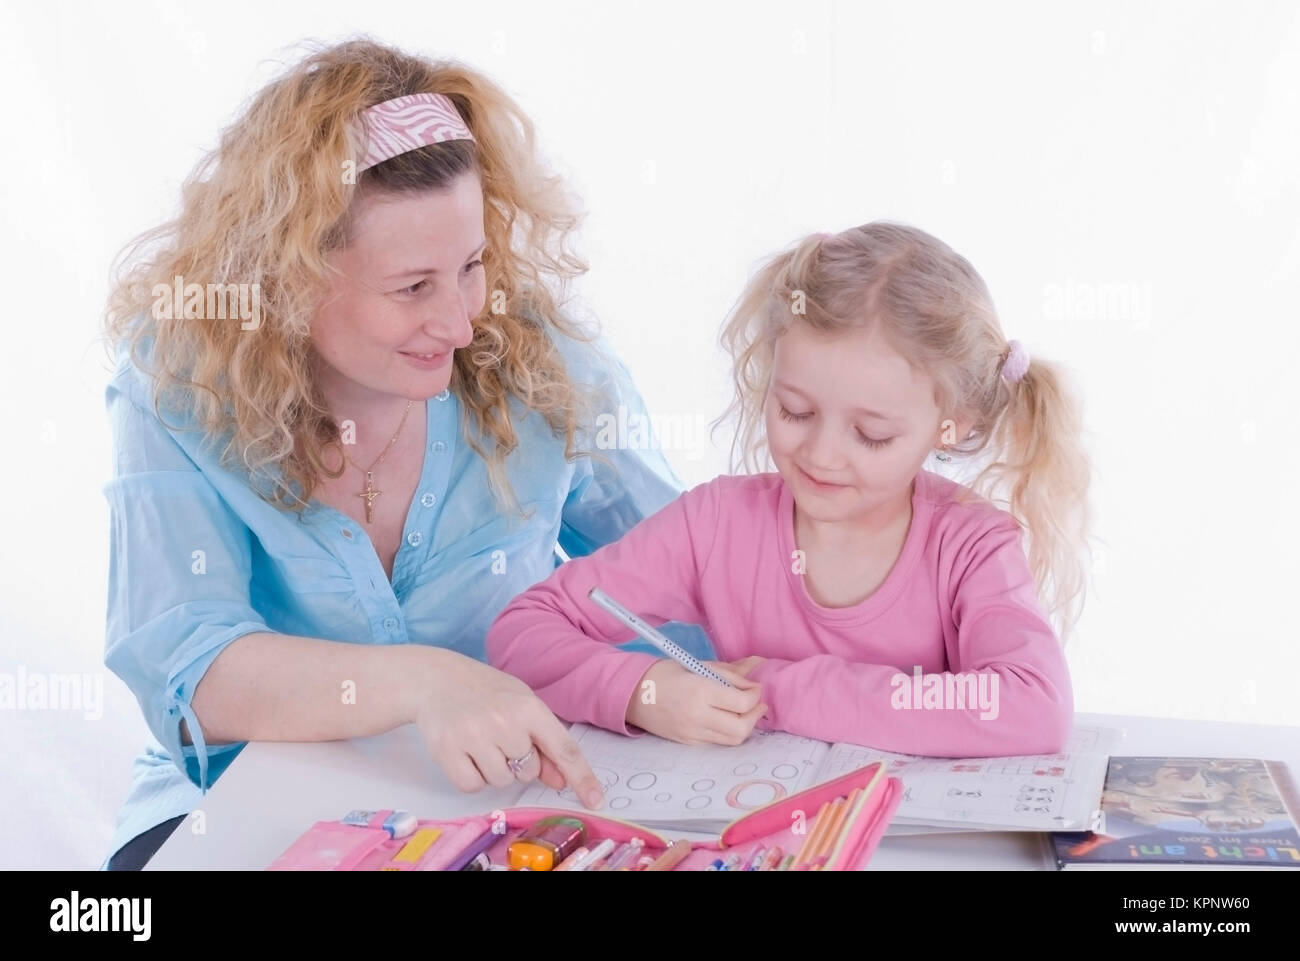 Model release , Mutter hilft Tochter, 7 Jahre, beim Lernen - mother and daughter learning together Stock Photo